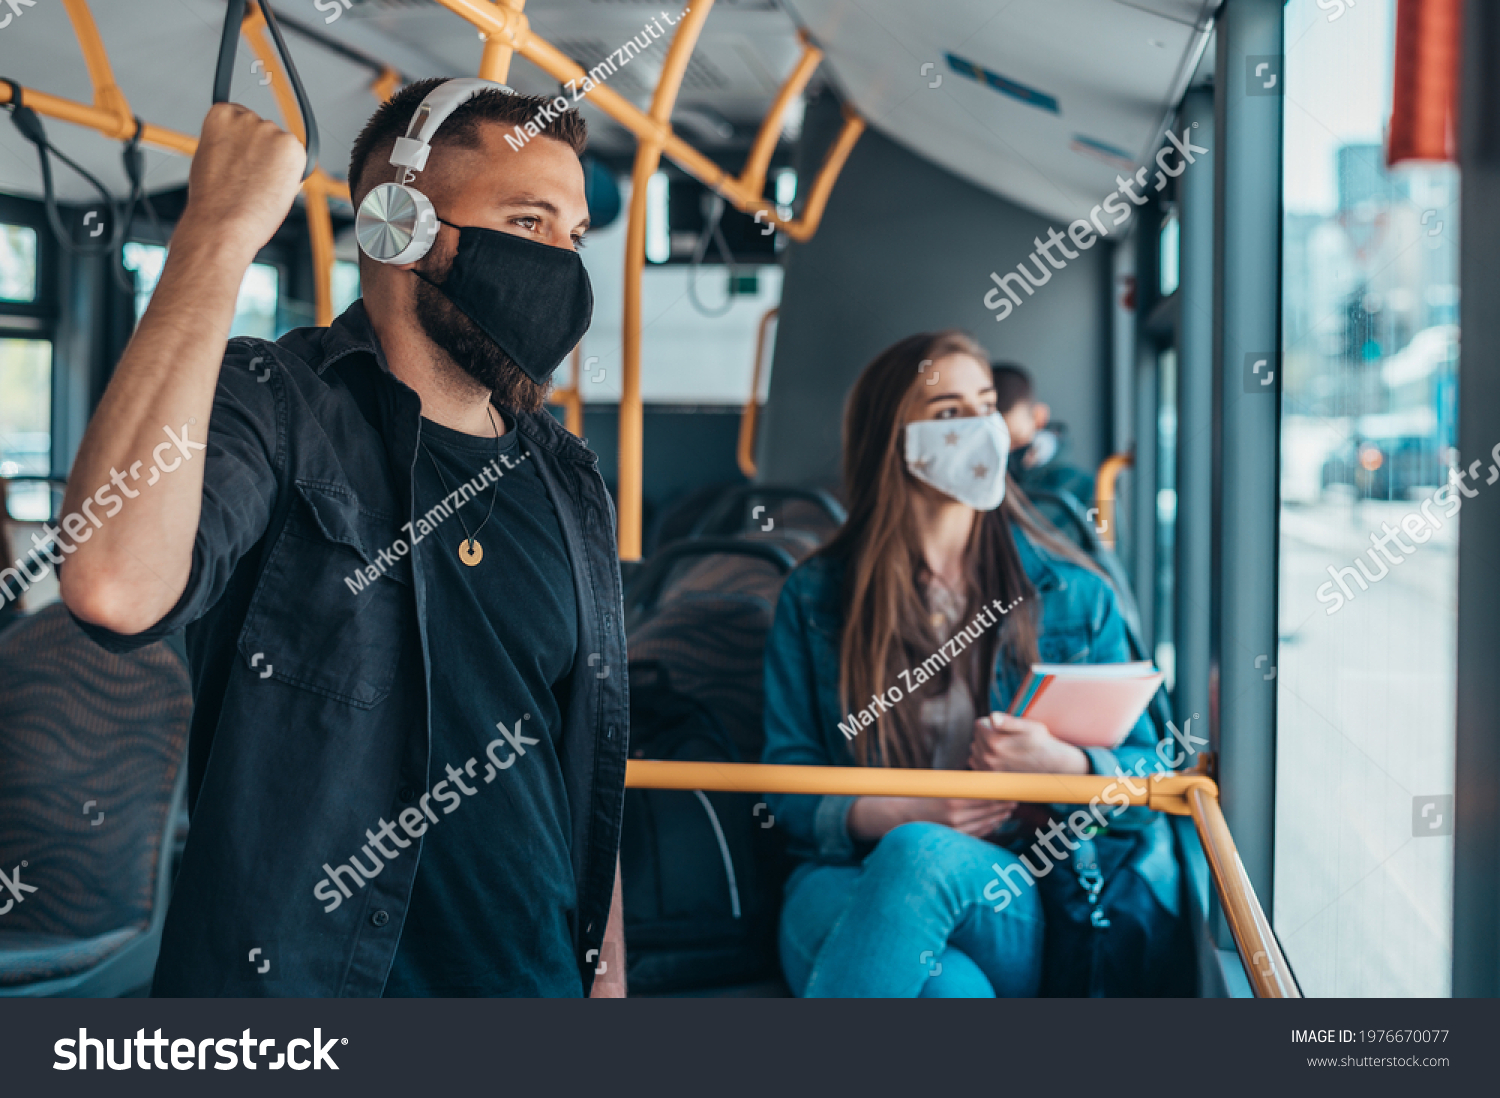 Passengers wearing protective mask while riding a bus and keeping the distance due to a corona virus pandemic #1976670077